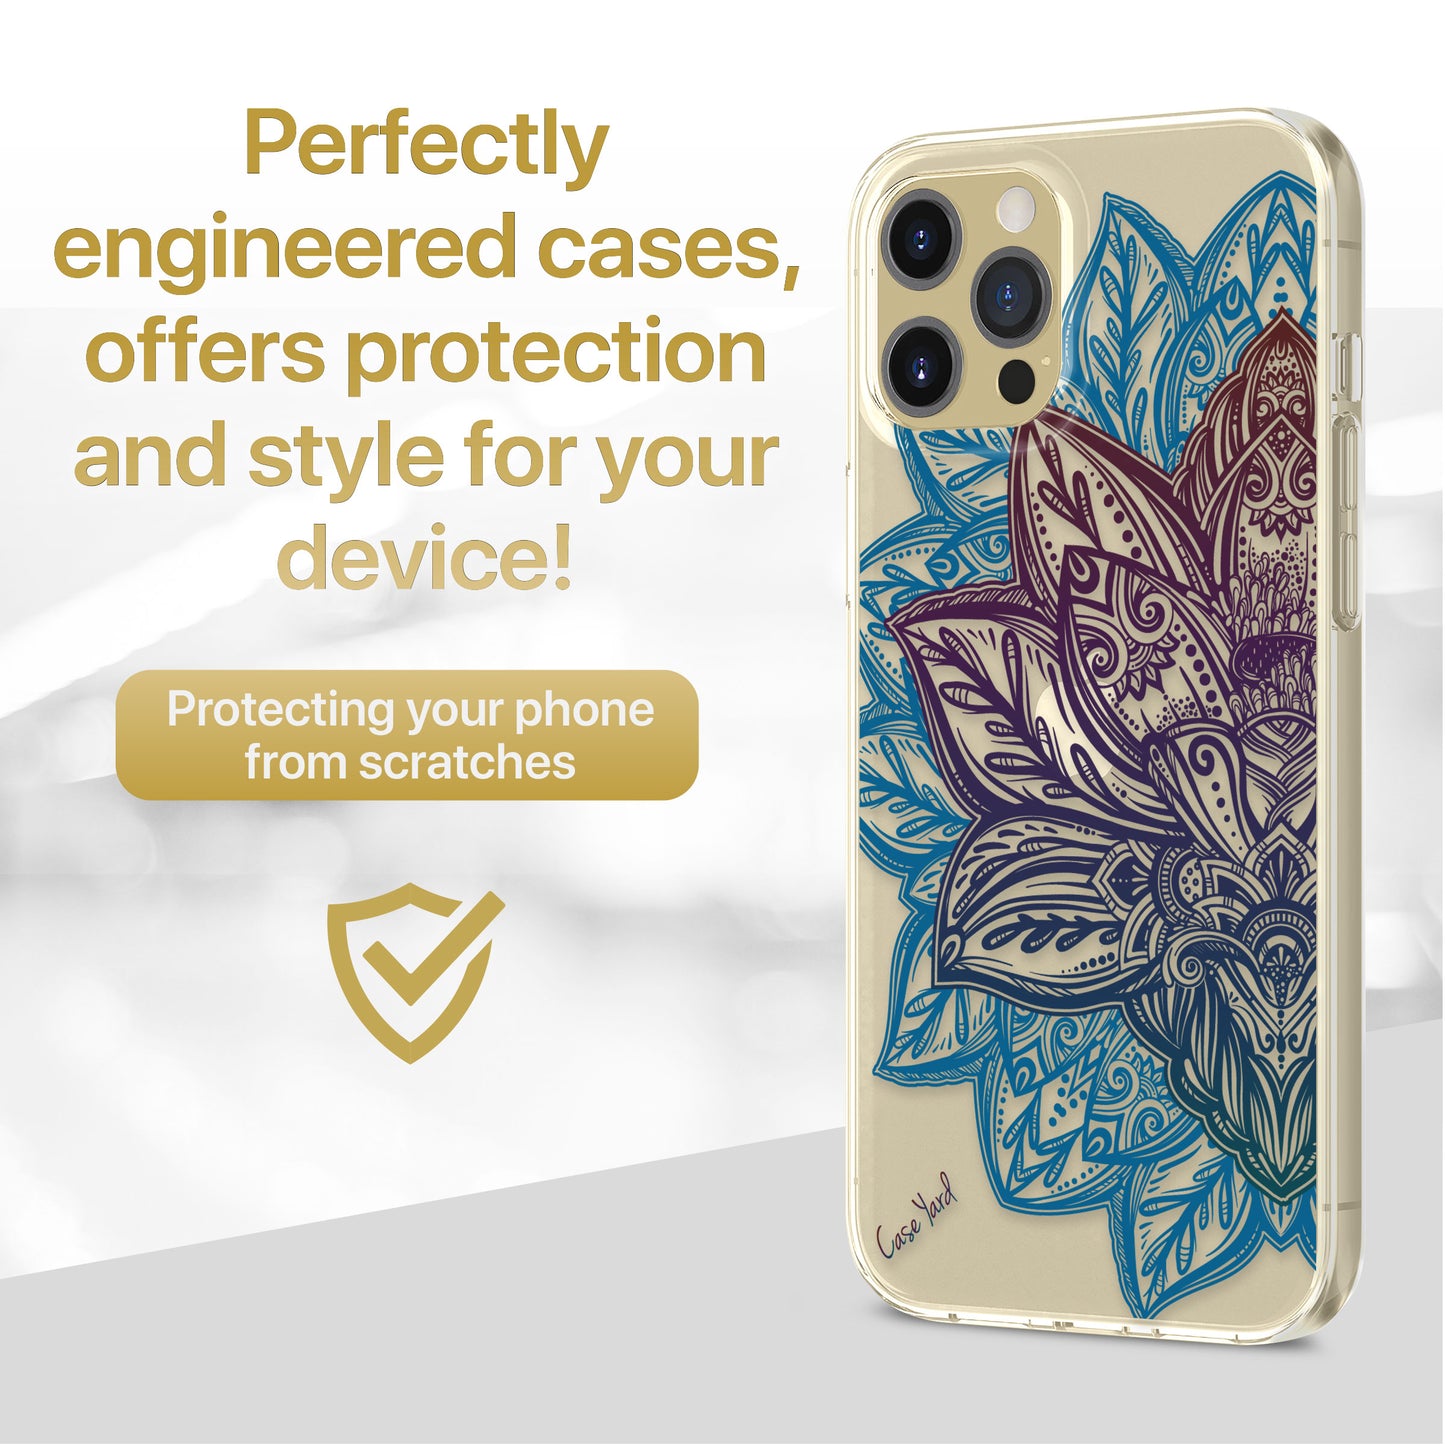 TPU Clear case with (Astra Mandala) Design for iPhone & Samsung Phones